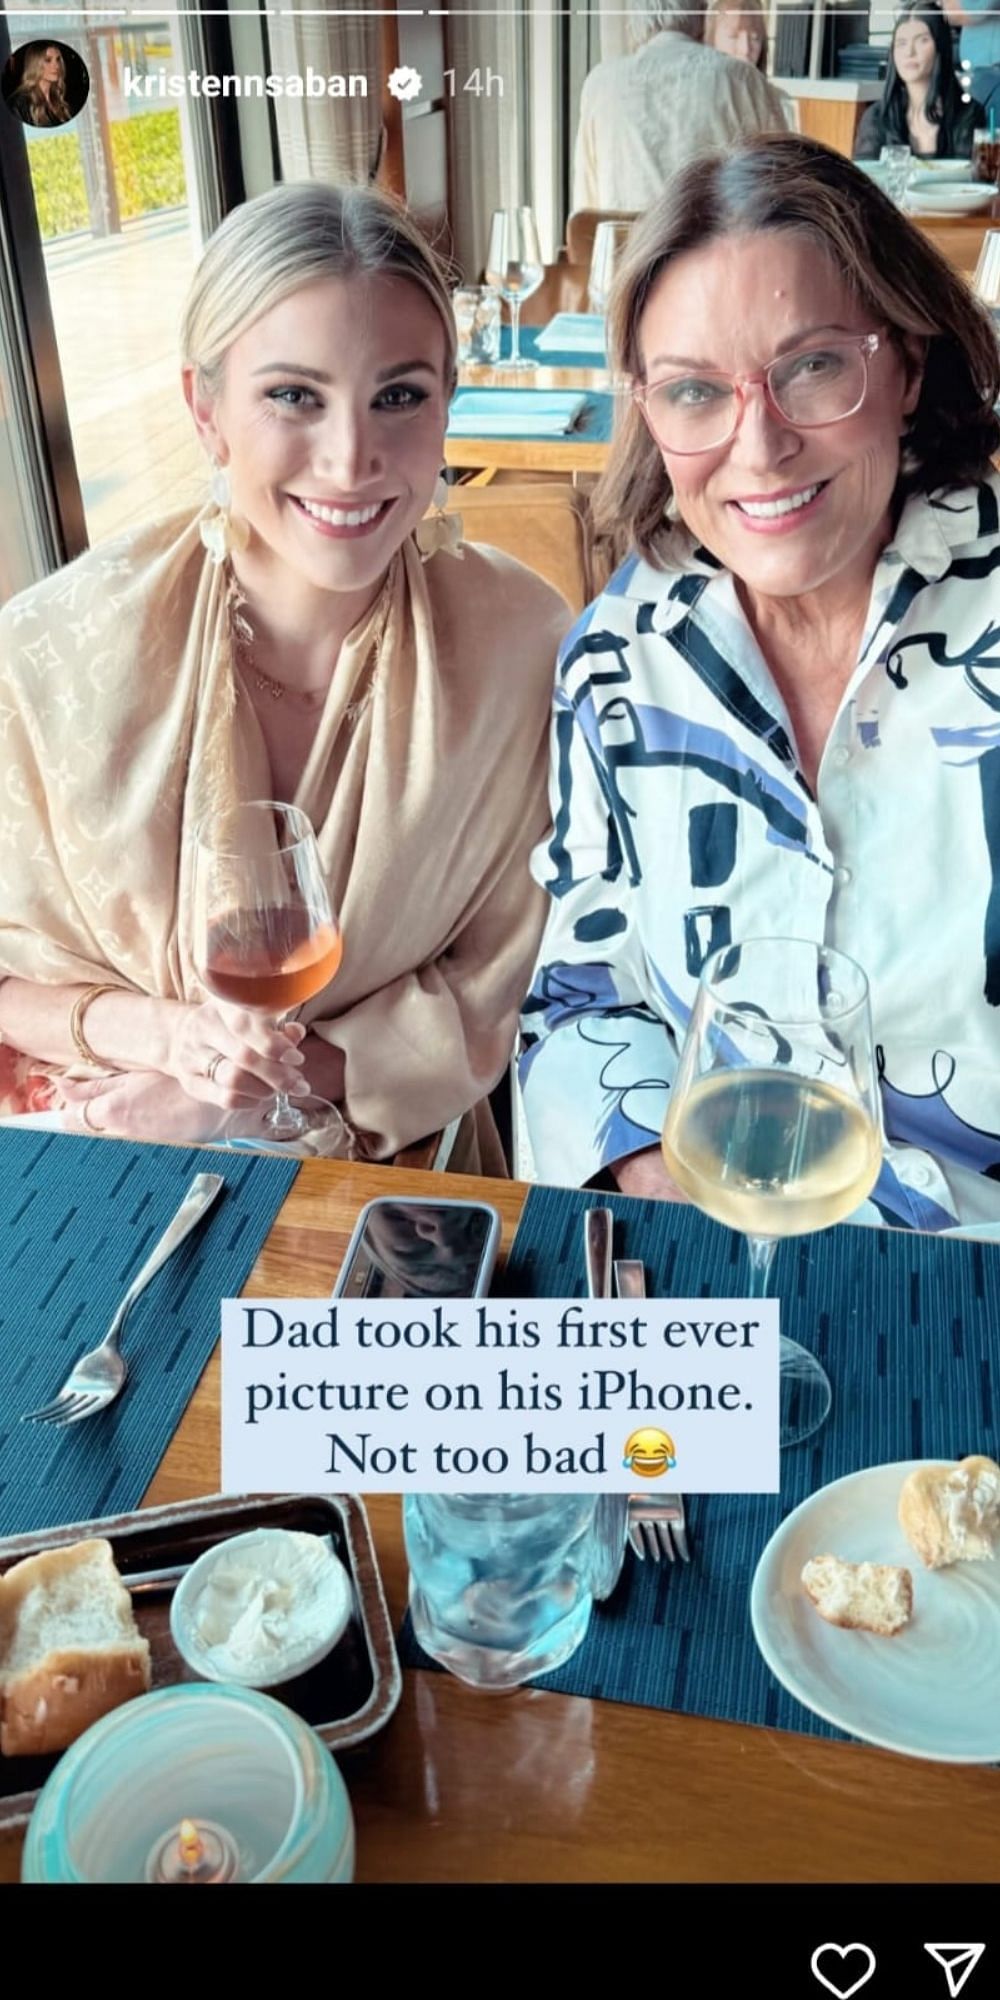 Kristen Saban shared the first iPhone picture taken by Nick Saban